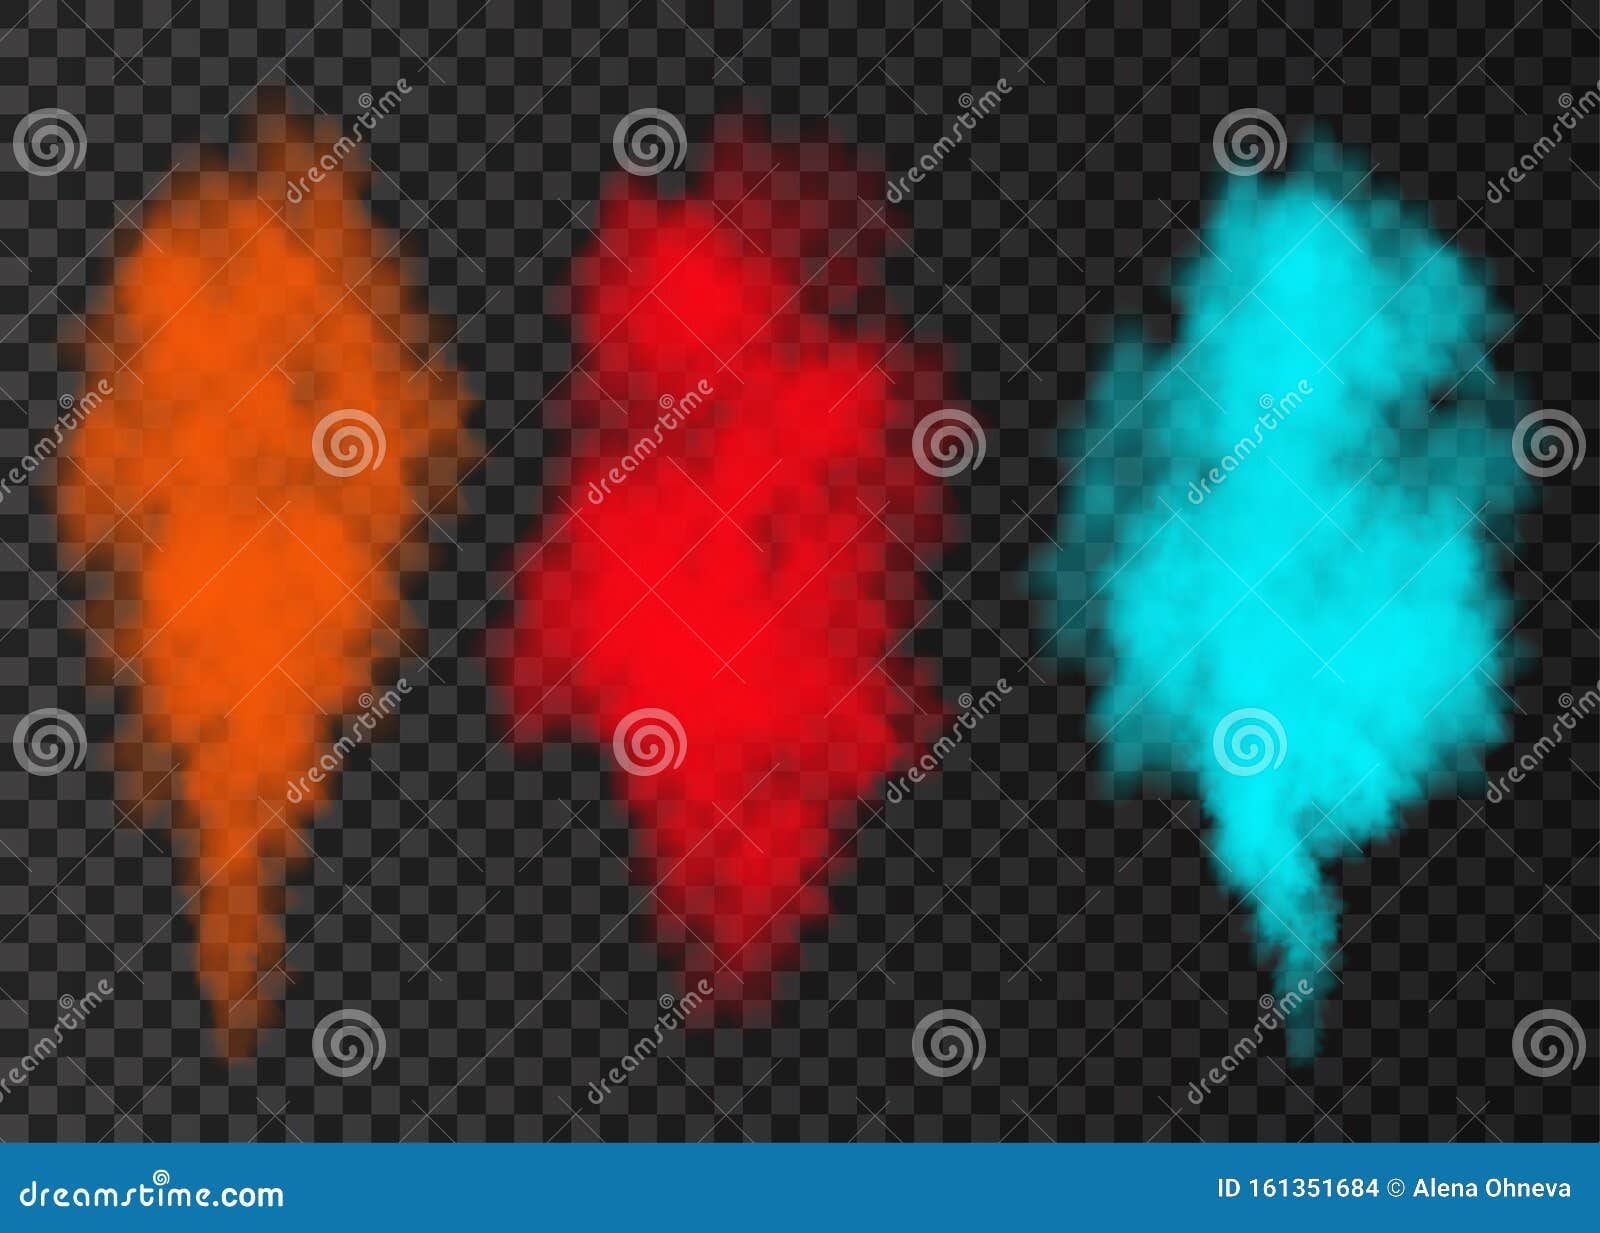 Blue, green smoke burst isolated on transparent background. Color steam  explosion special effect. Realistic vector column of fire fog or mist  texture .